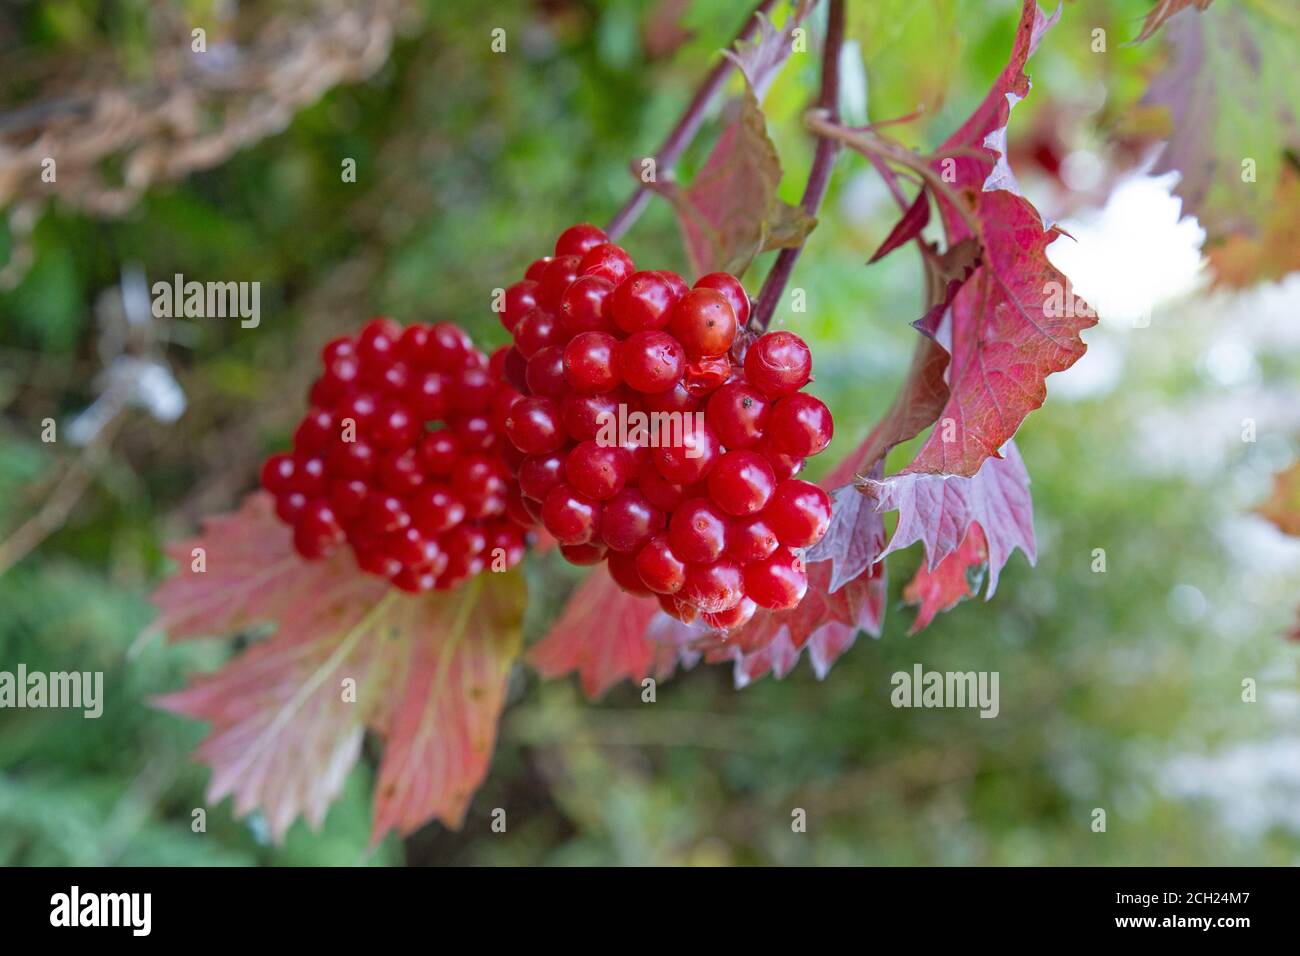 Berries on the Guelder rose, Viburnum oculus, quite common in the UK. The berries contain Vitamin C but must be cooked before eaten. Stock Photo